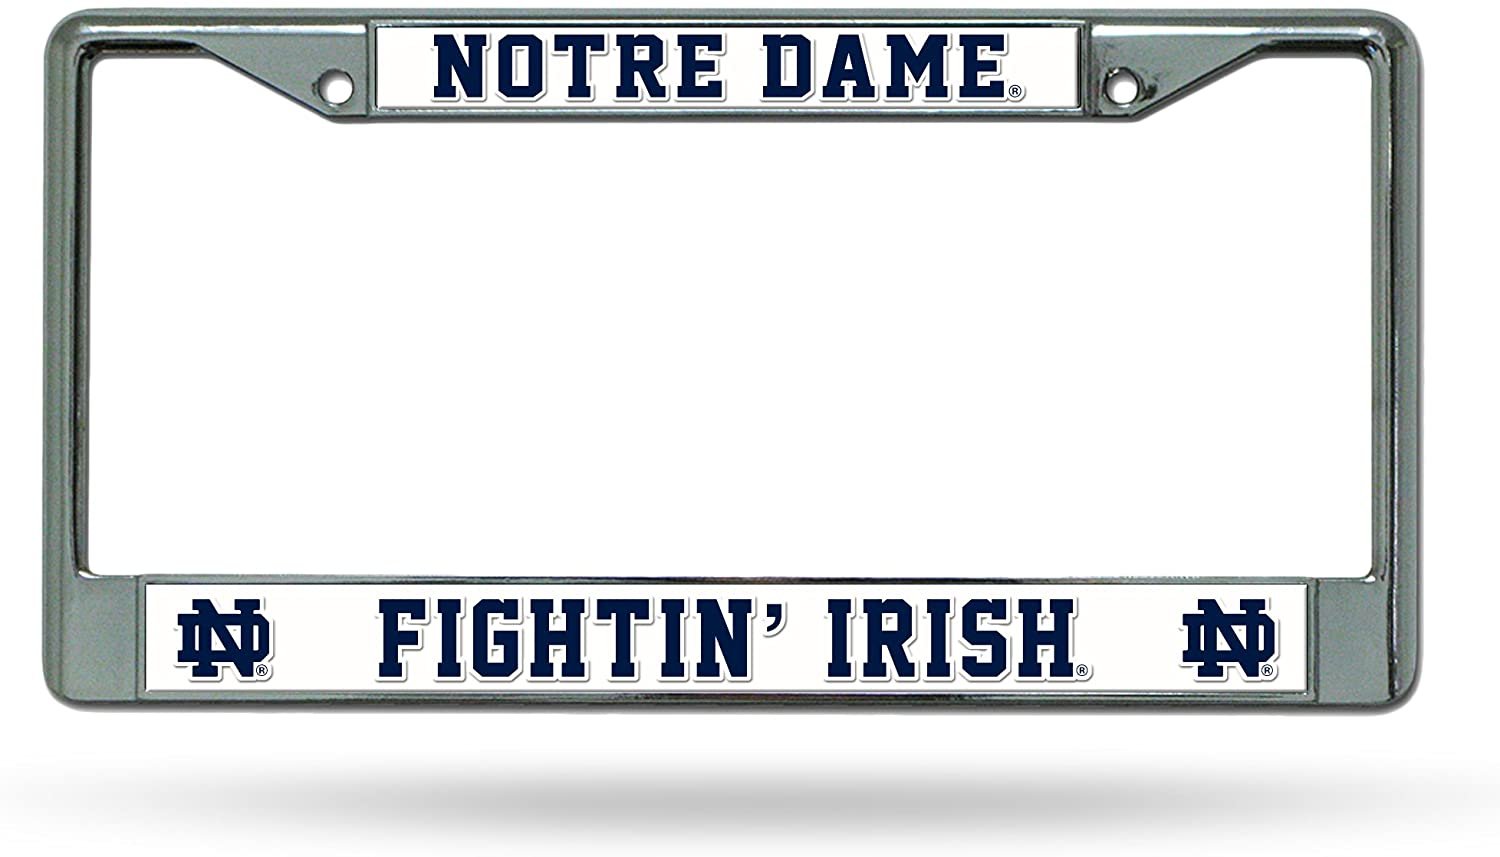 Notre Dame Fighting Irish Metal License Plate Frame Tag Cover University of